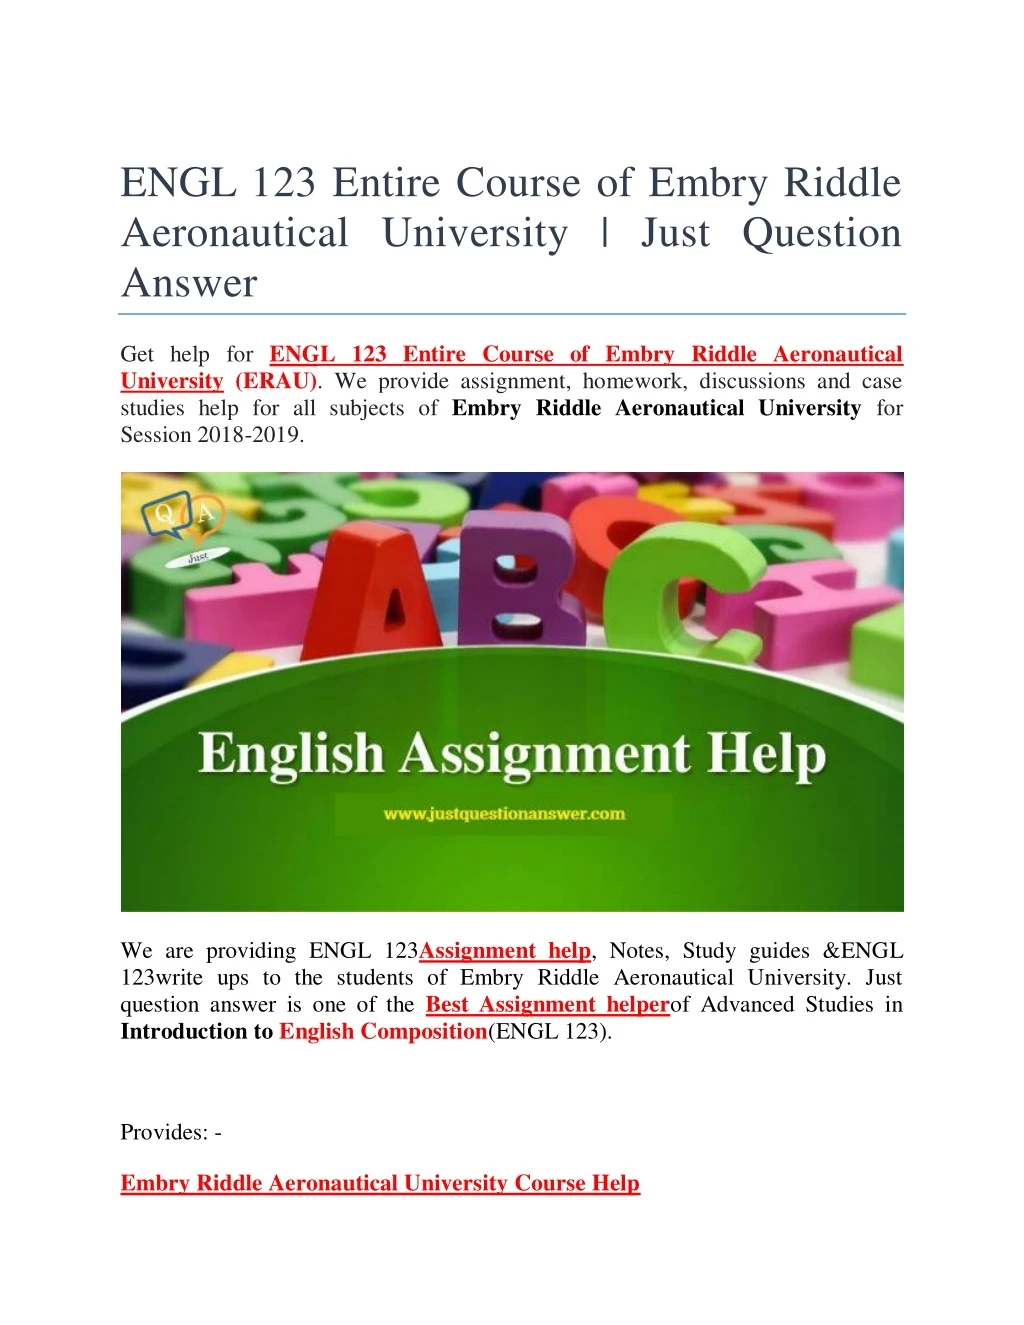 engl 123 entire course of embry riddle